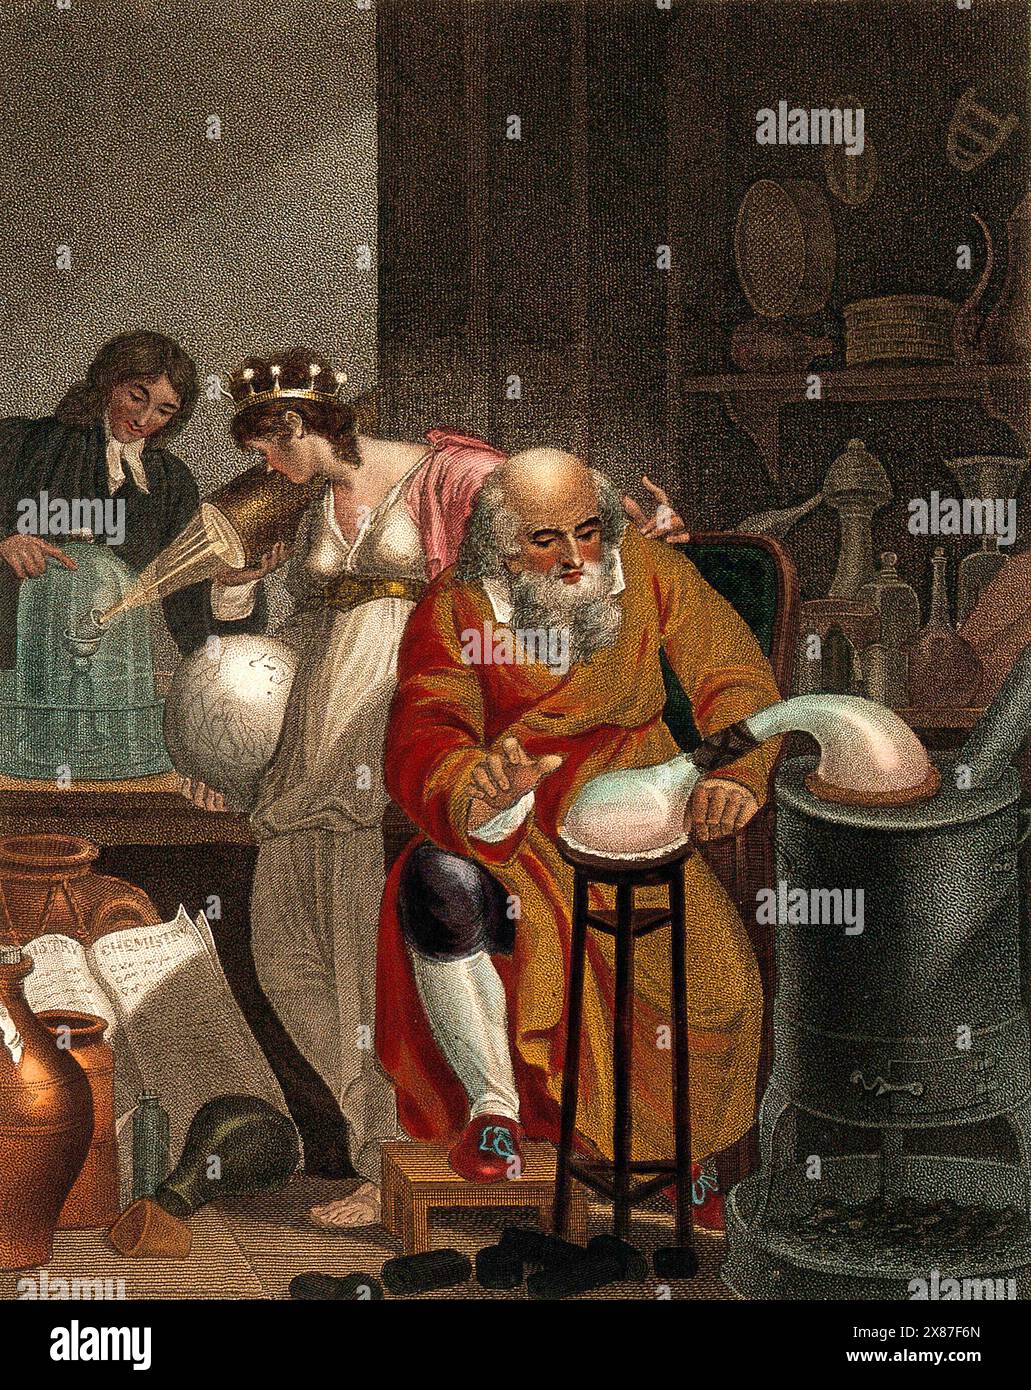 A man conducts an alchemical experiment with an alembic, in the foreground, in the background a female figure representing the world observes a man of the new school of chemistry who prepares an oxygen experiment with a glass jar and a candle: a representation of the historical transition between alchemy and chemistry. Coloured stipple engraving by J. Chapman, 1805 Stock Photo